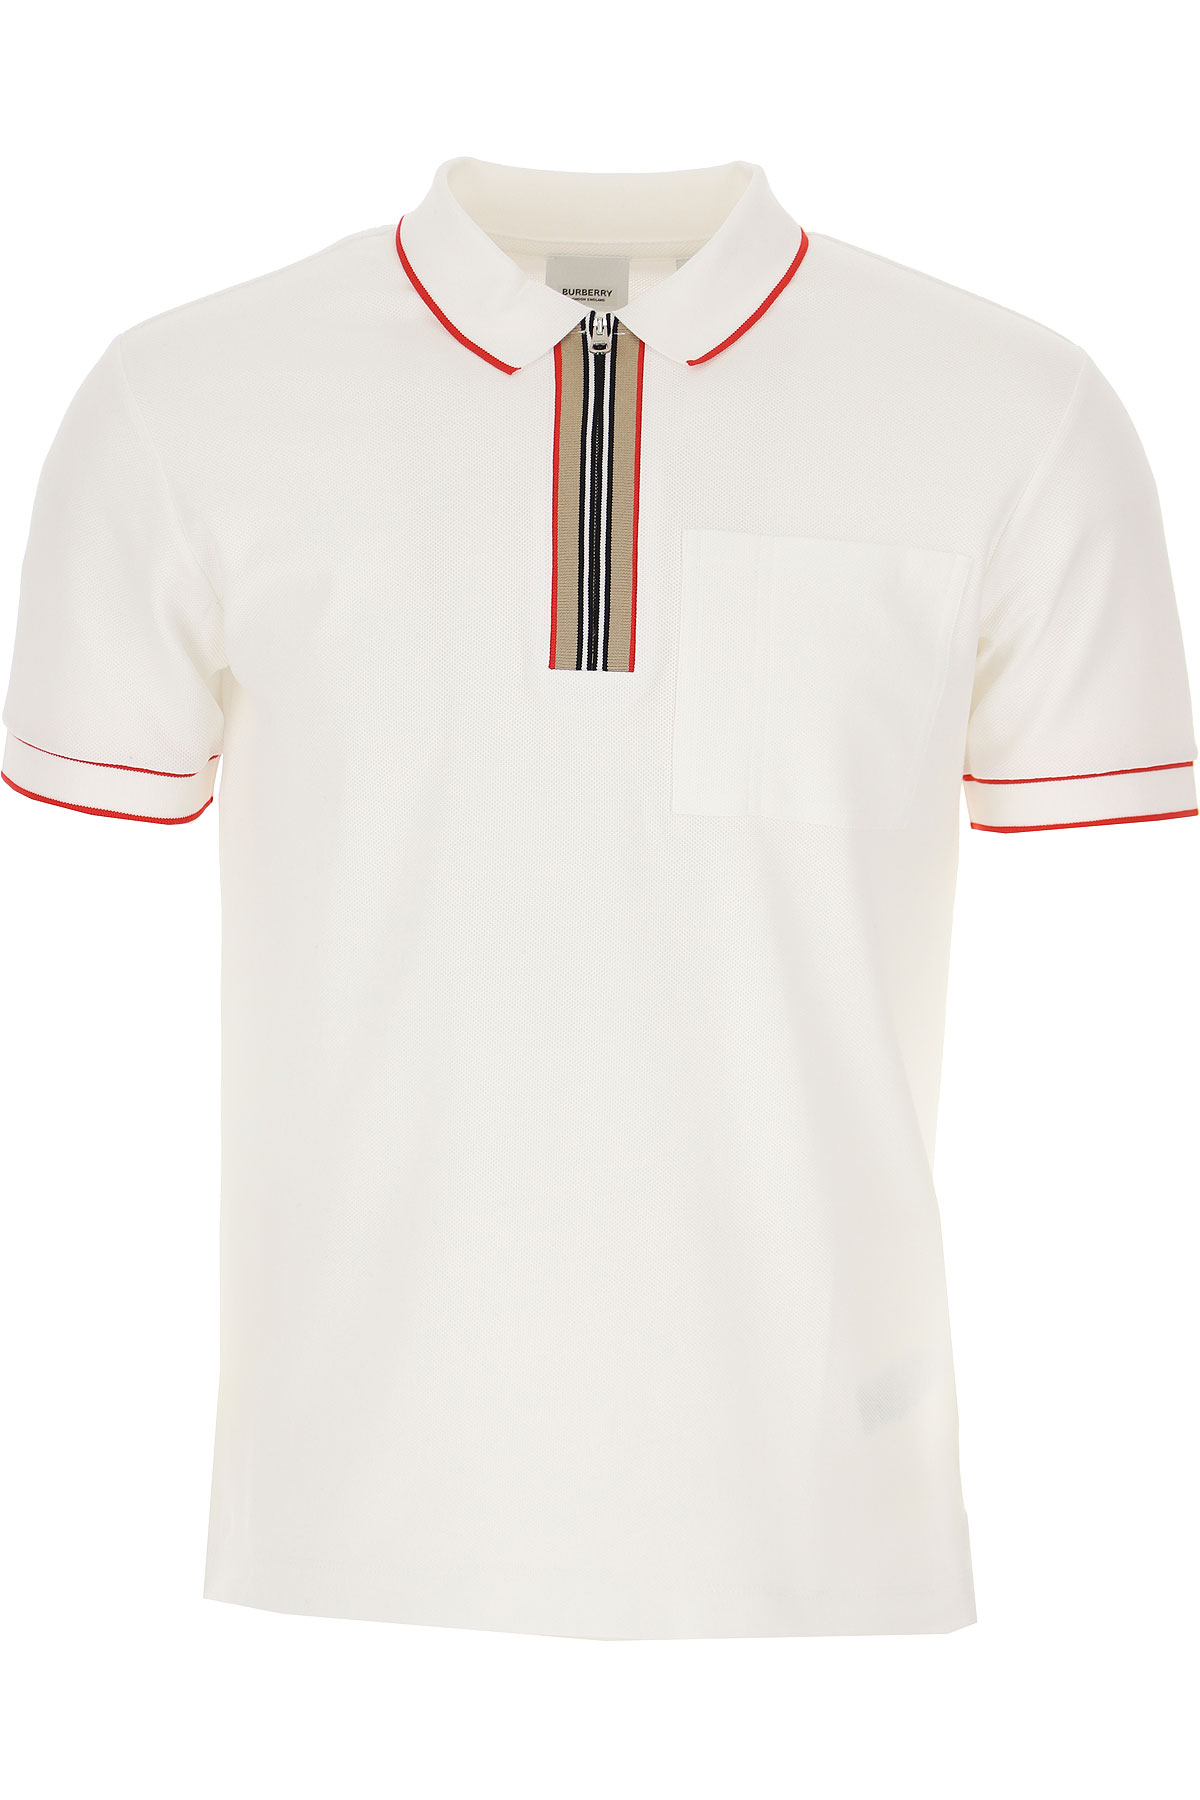 Must Have Burberry Polo Shirt for Men On Sale, White, Cotton, 2019, L M ...